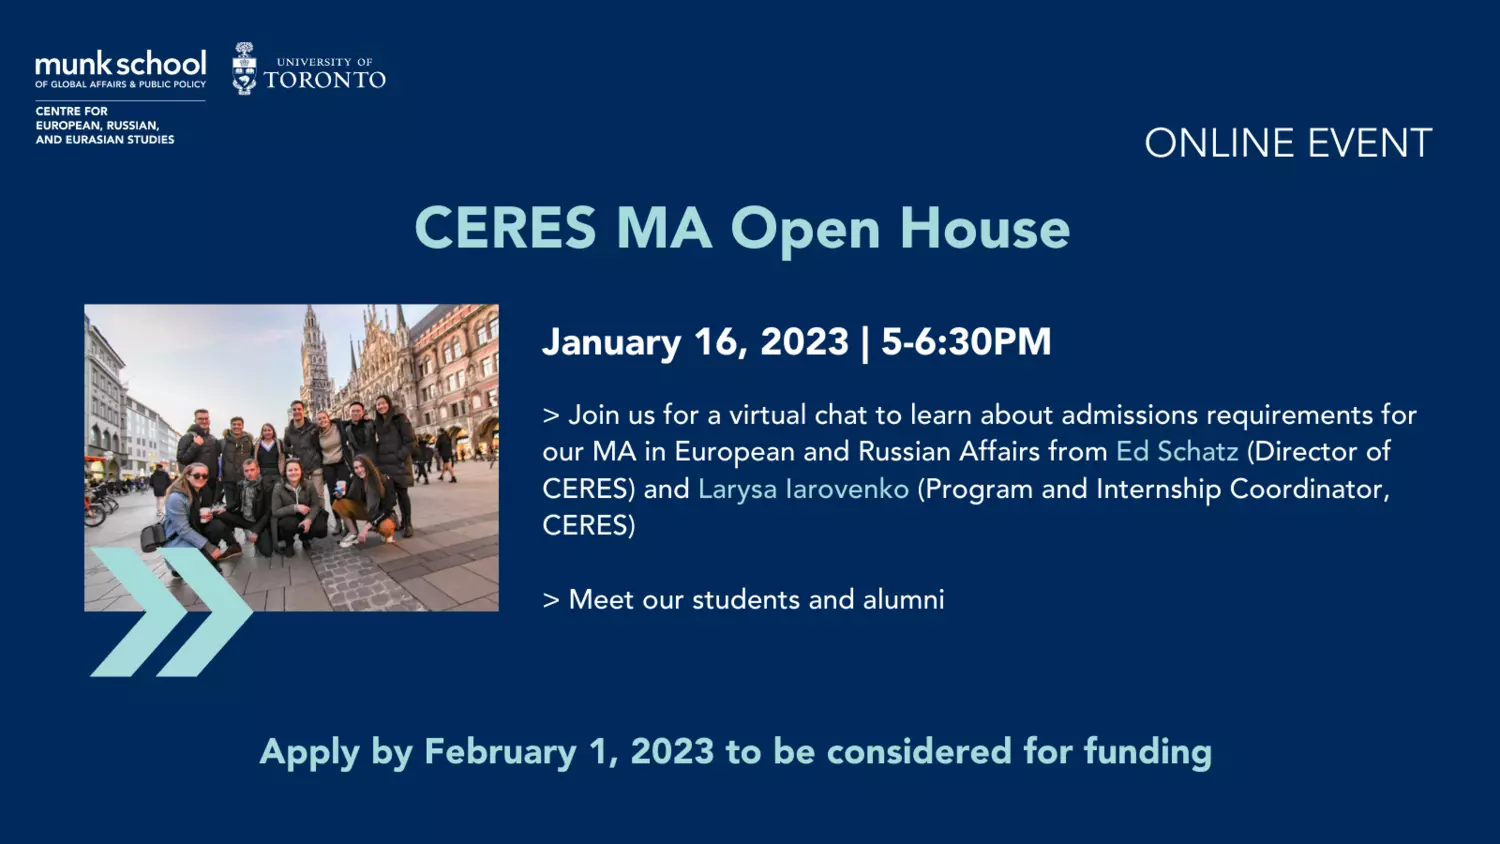 CERES MA Open House  January 16, 2023 | 5:00PM - 6:30PM